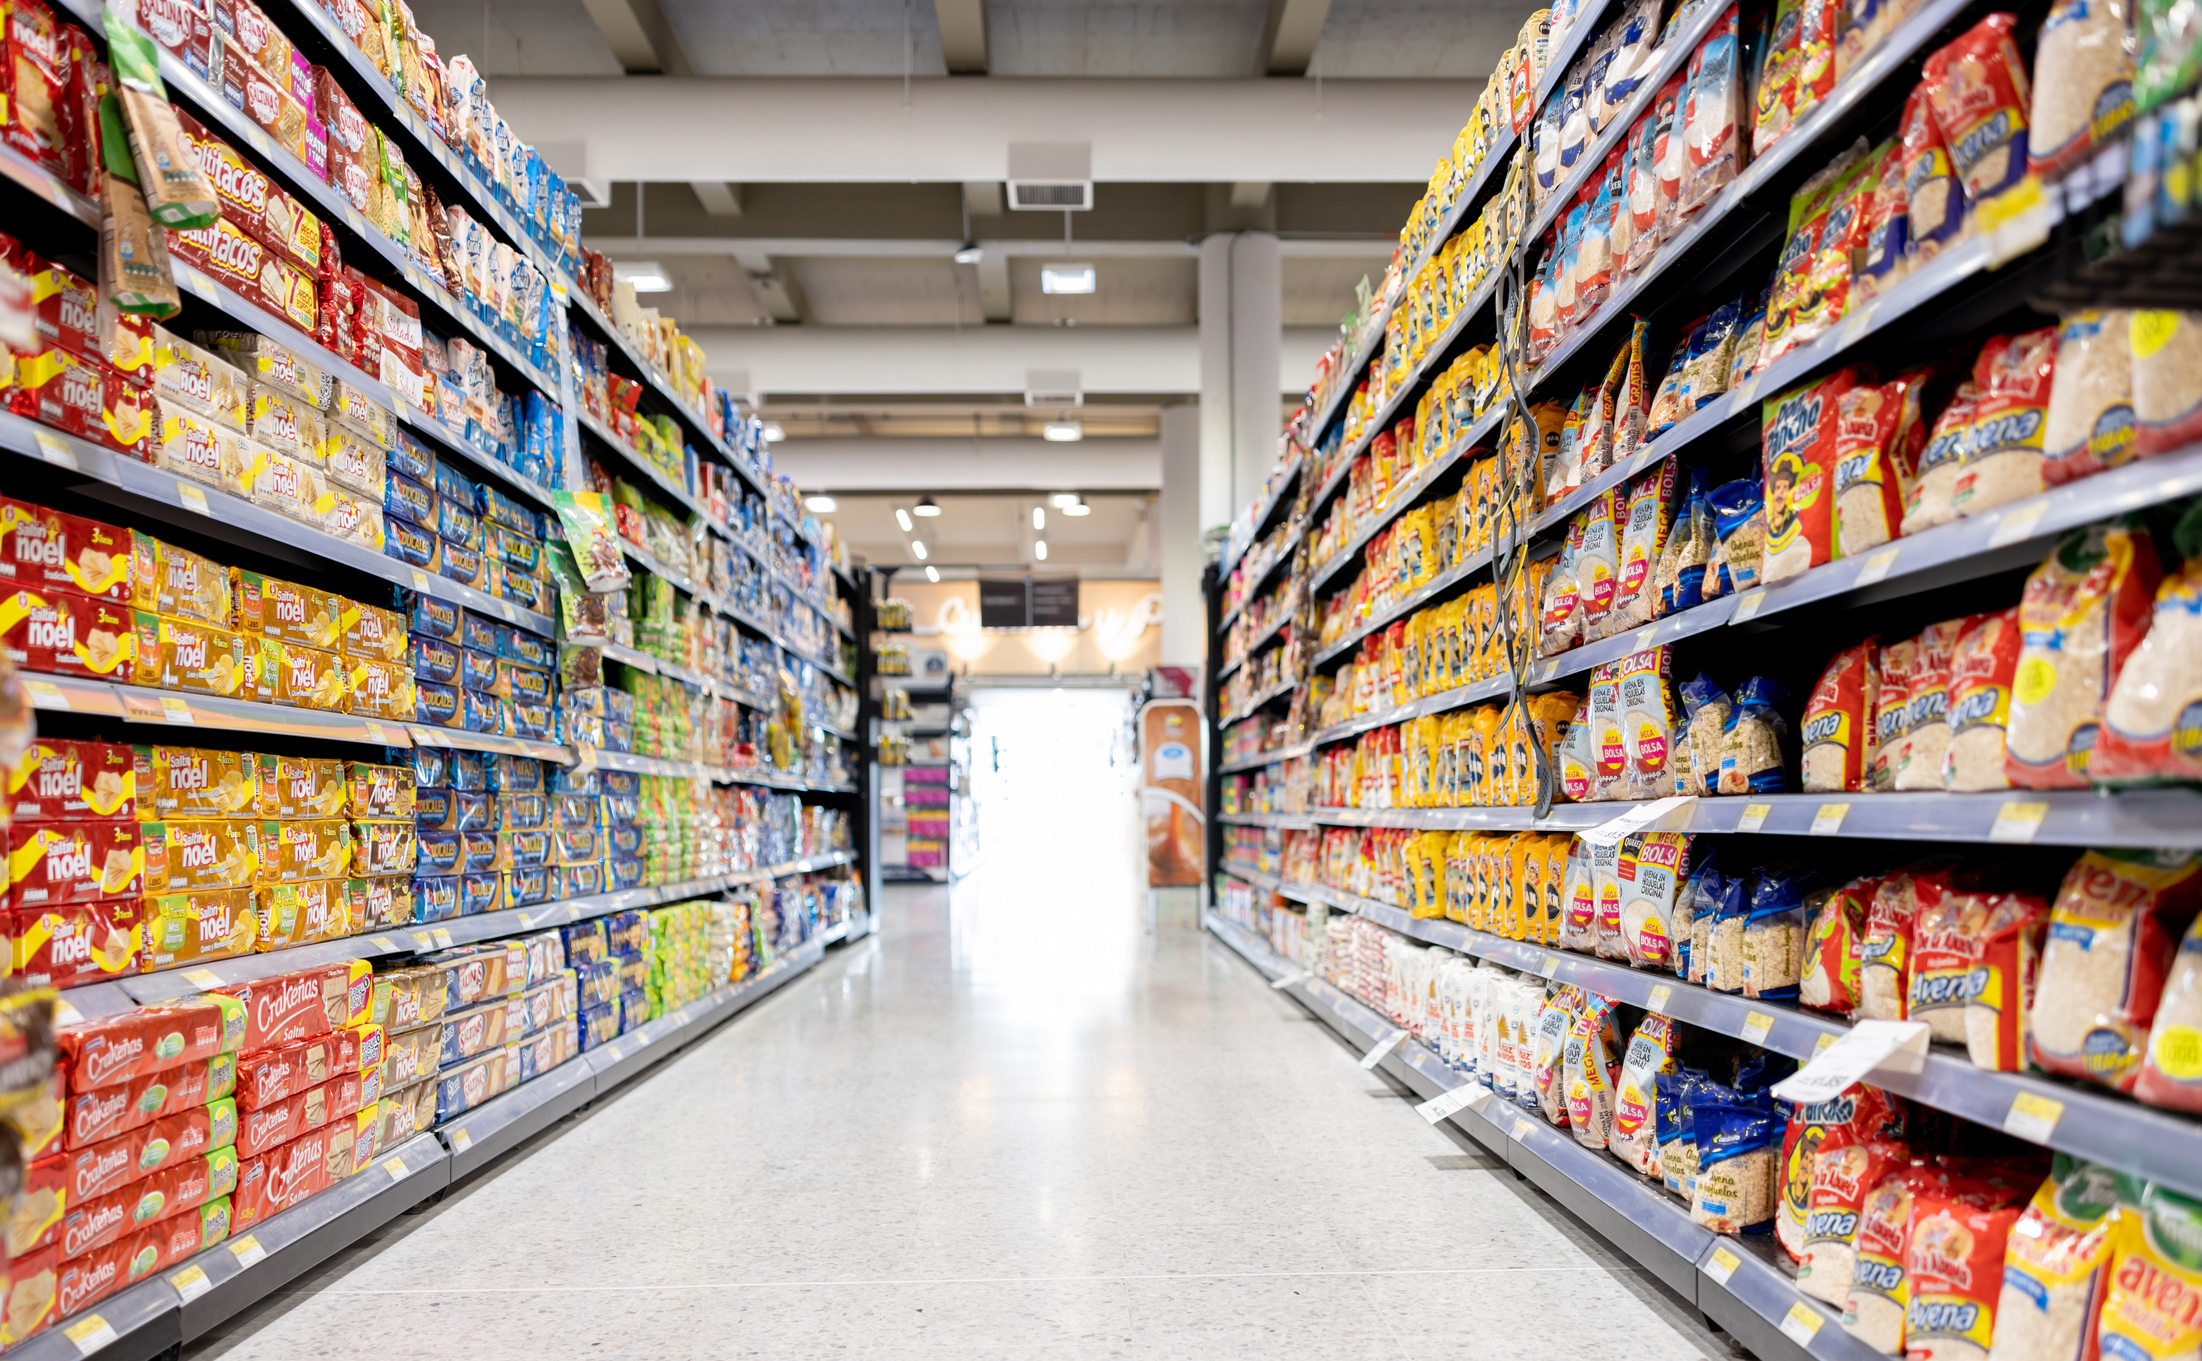 Grocery store aisle lined with shelves of packaged food items